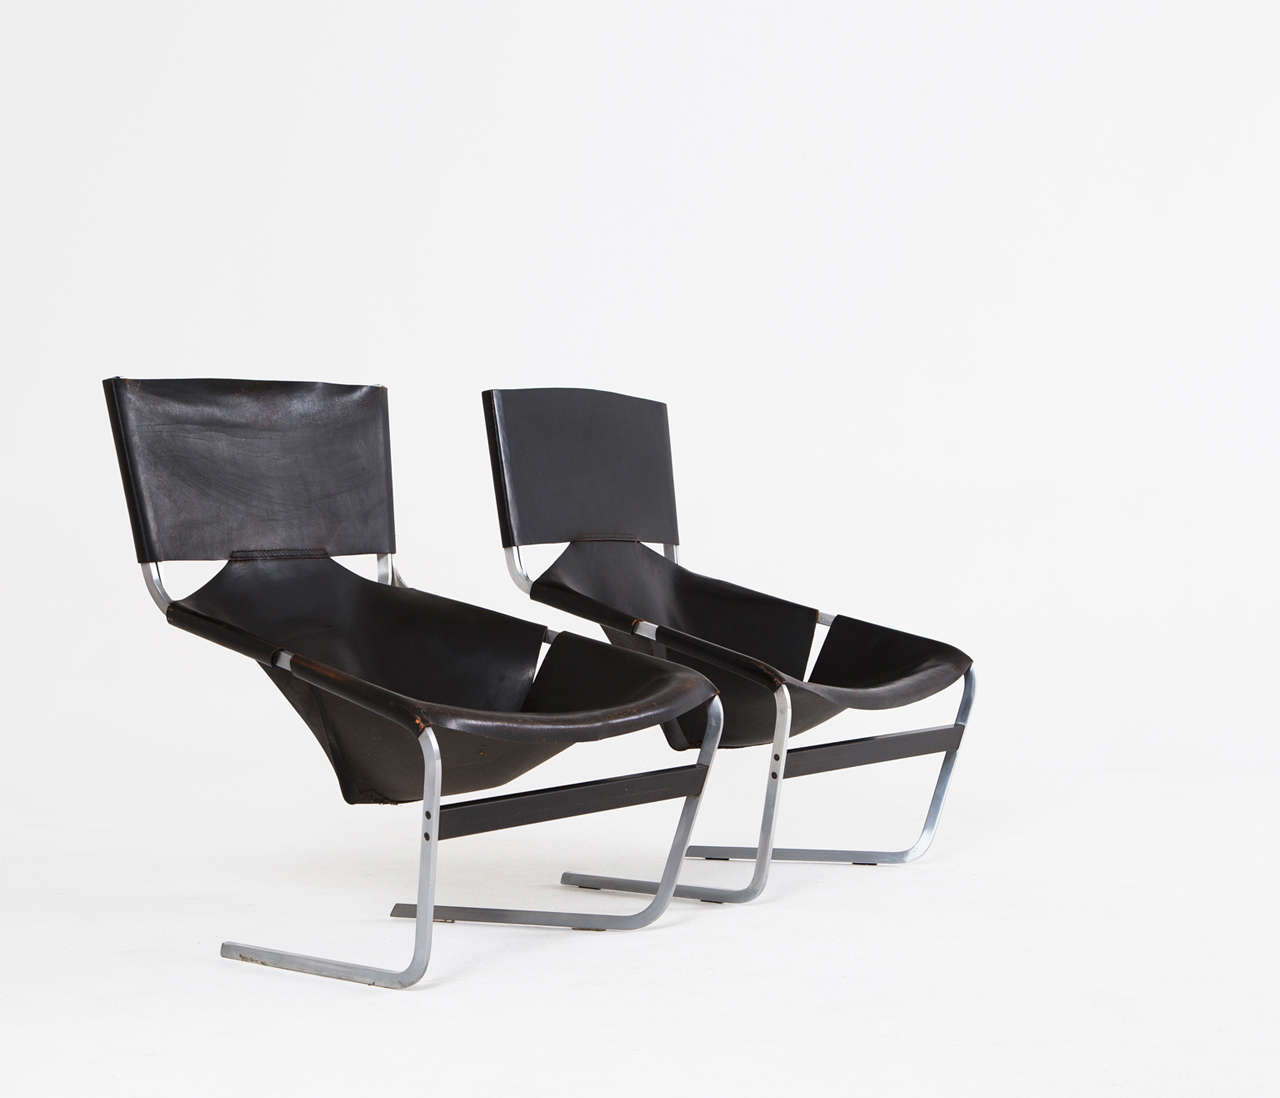 French Pair of F-444 Lounge Chairs by Pierre Paulin